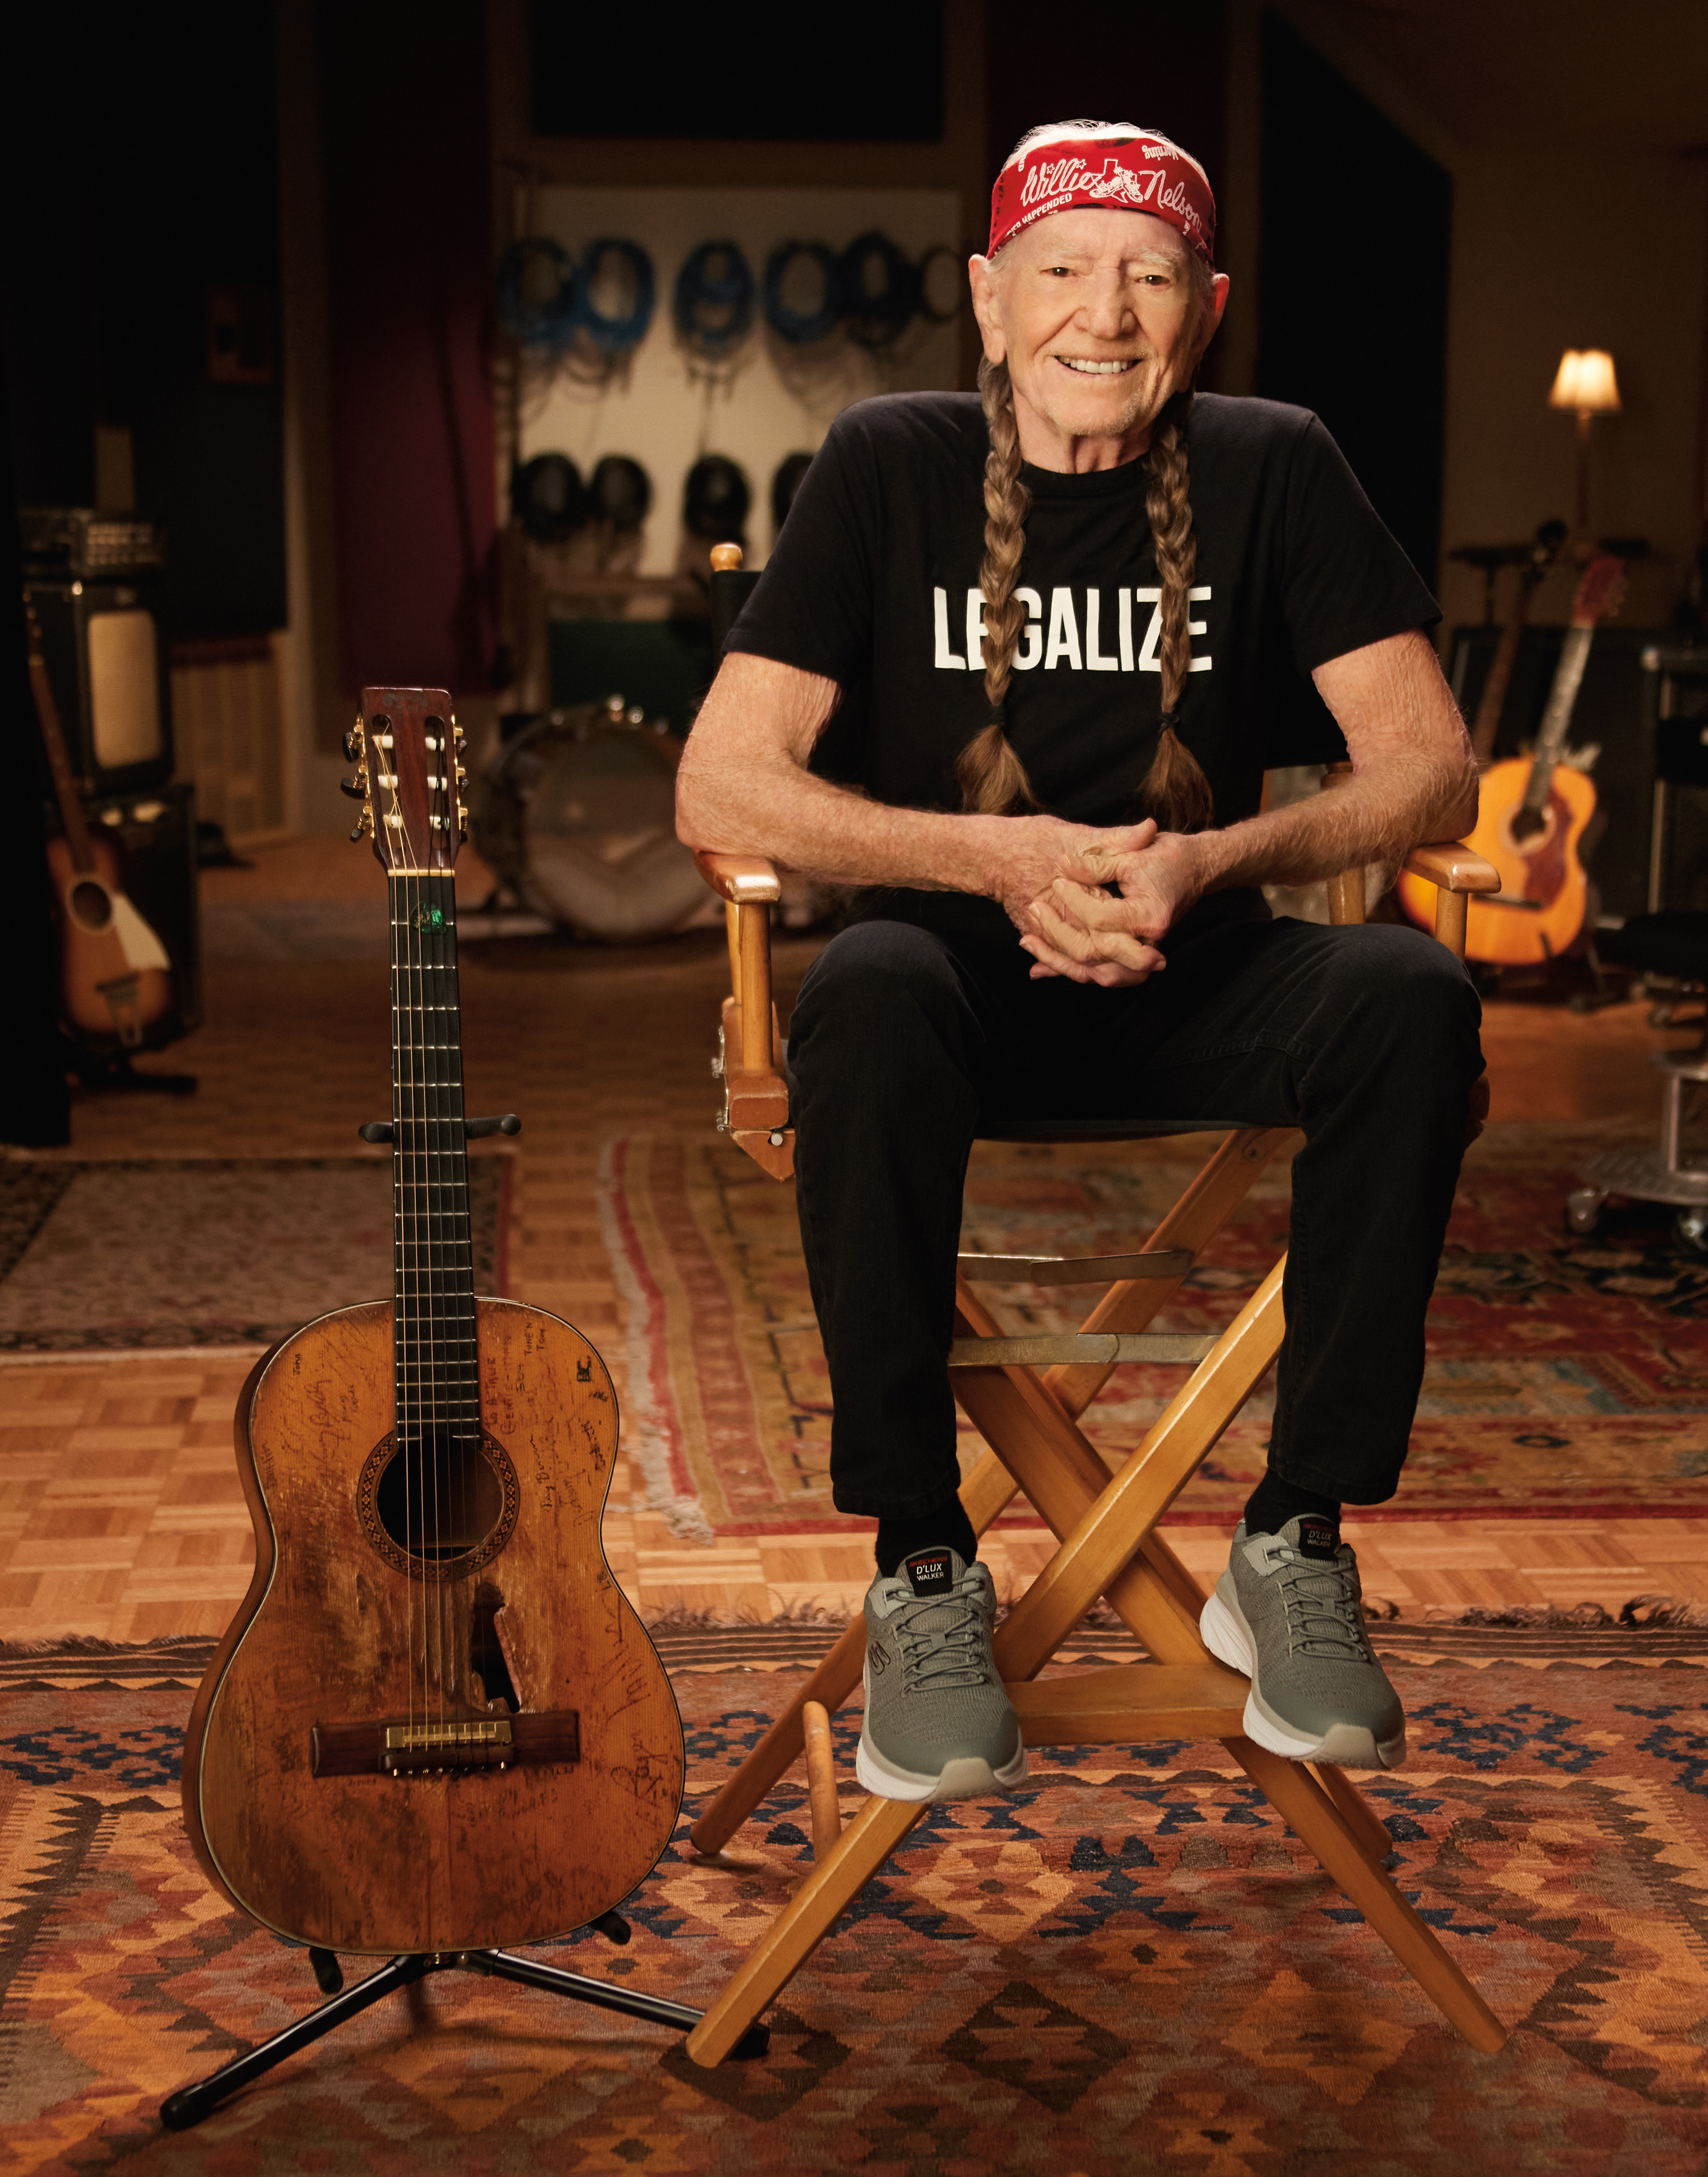 beginsel Luidruchtig Tweet Willie Nelson Goes on the Road in Legalize Campaign With Skechers at the  Super Bowl | Business Wire